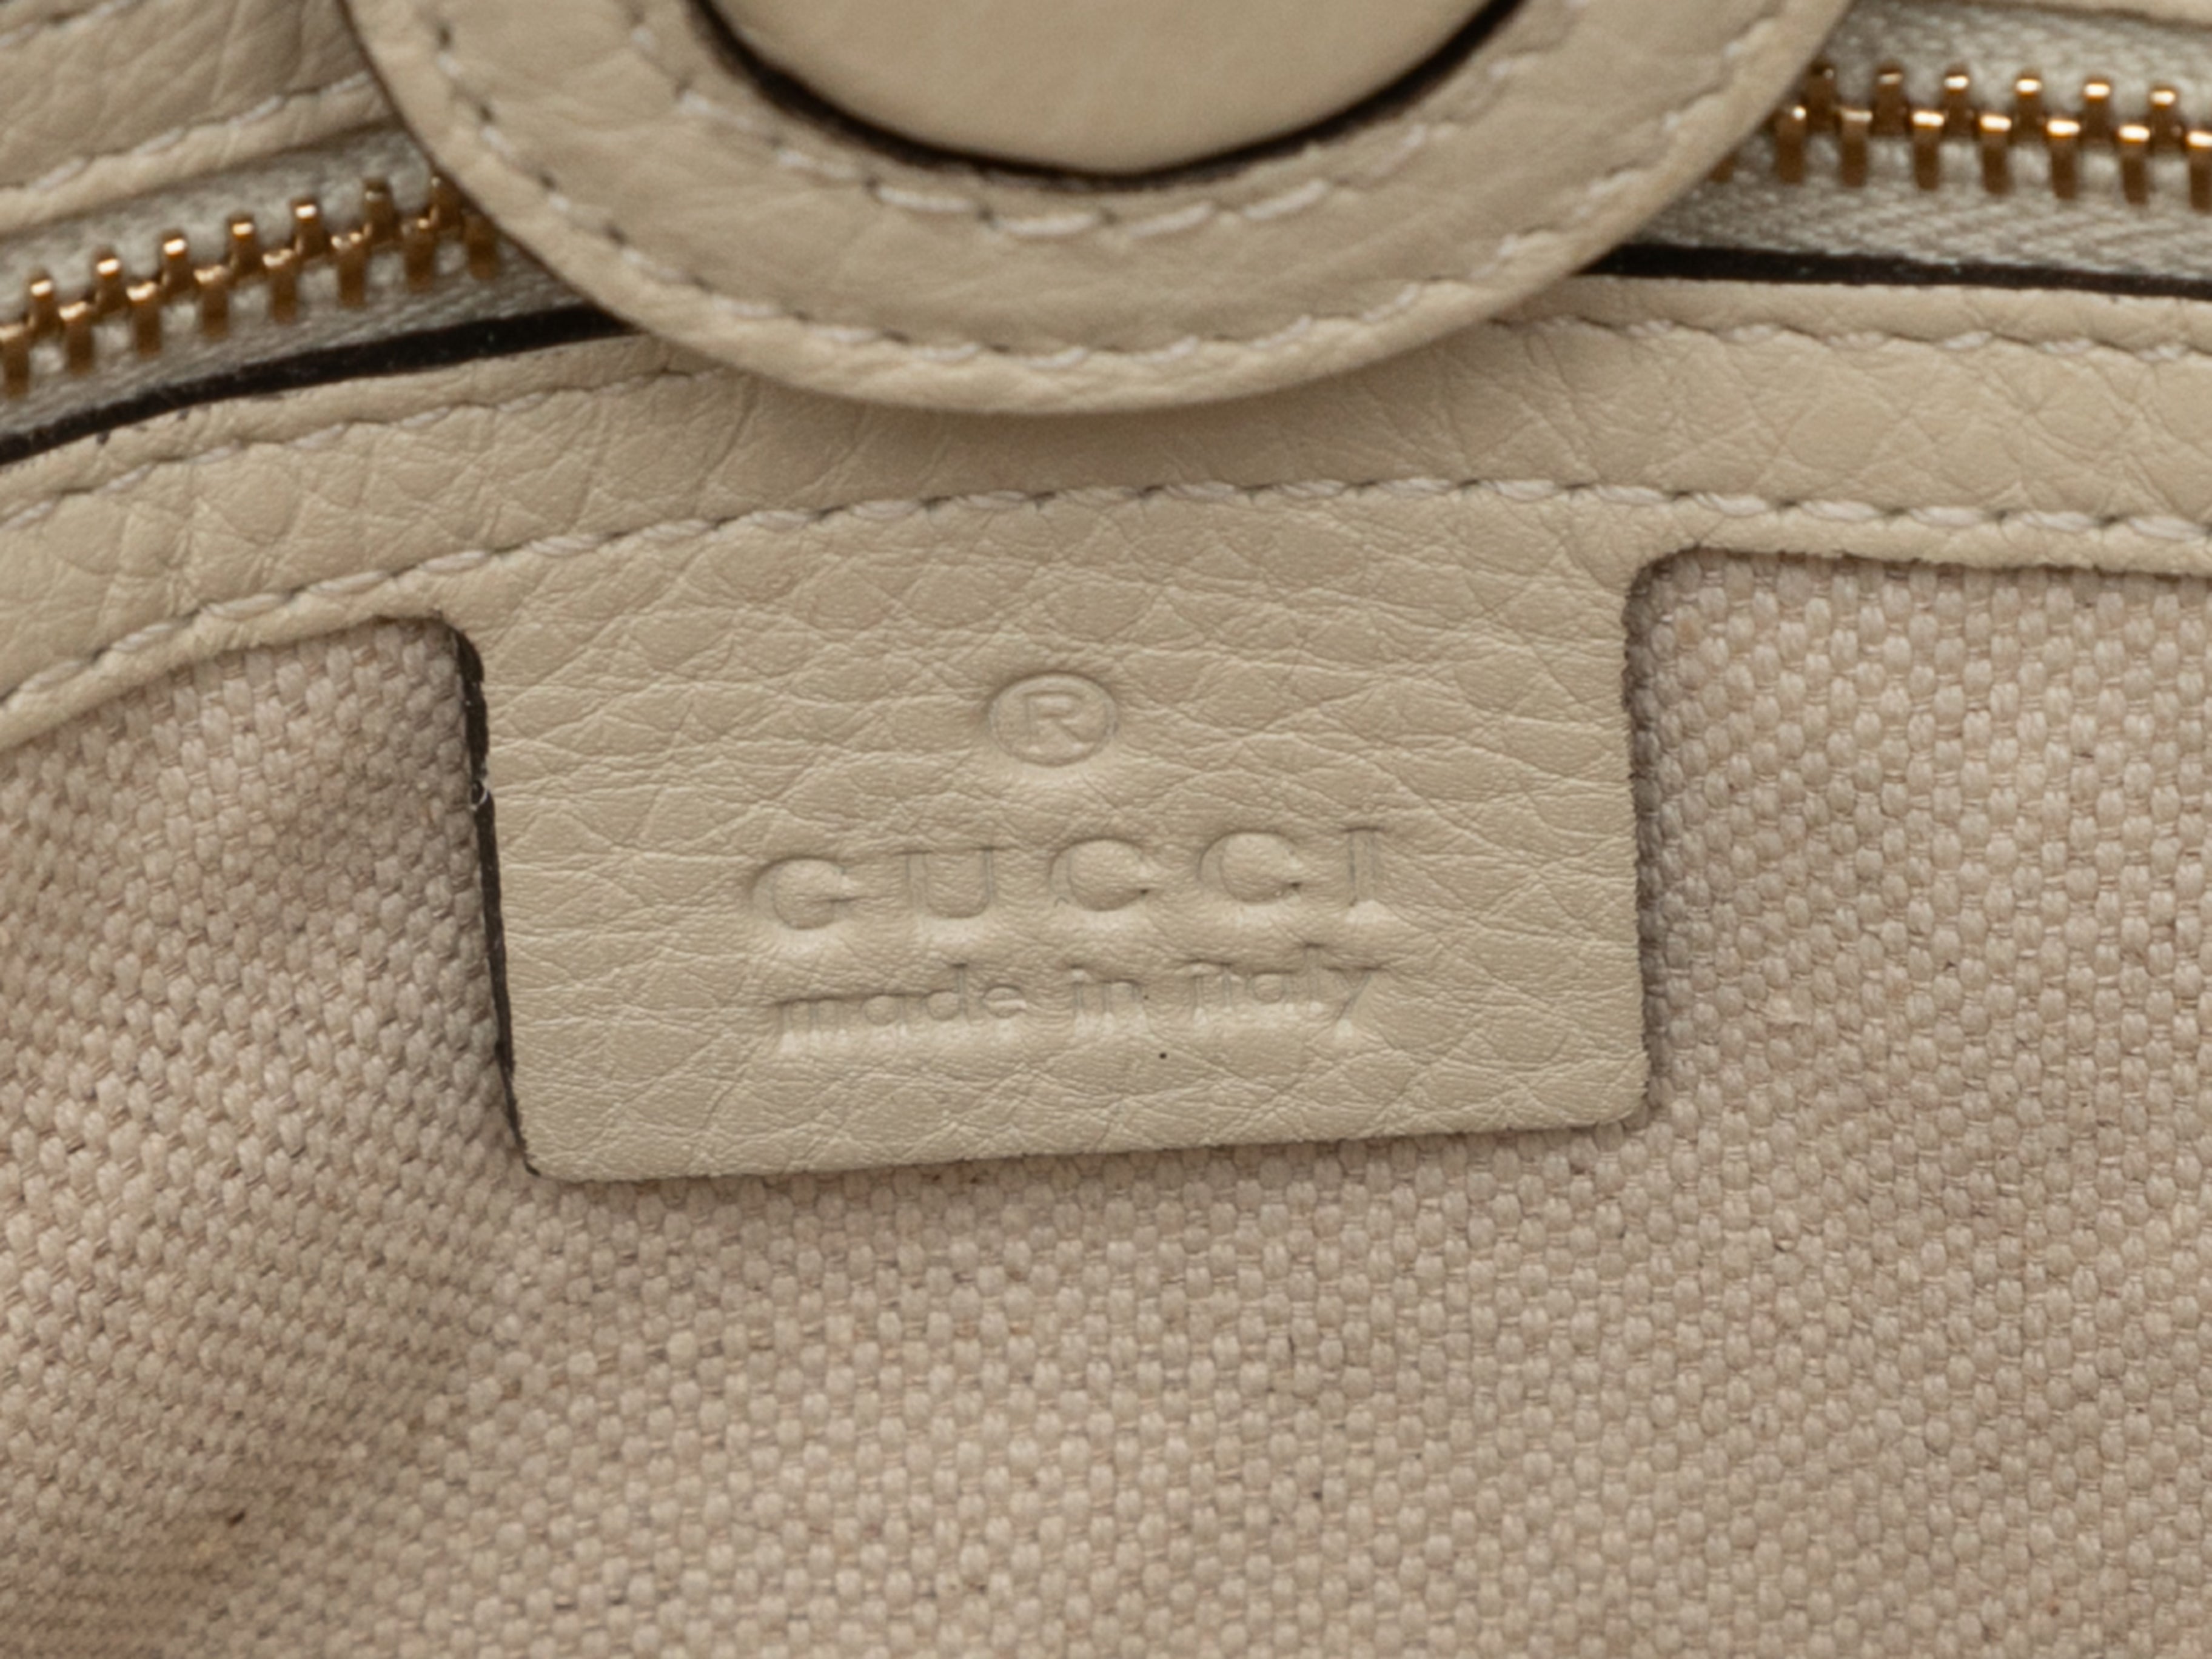 RvceShops Revival, White Gucci Leather Tote Bag